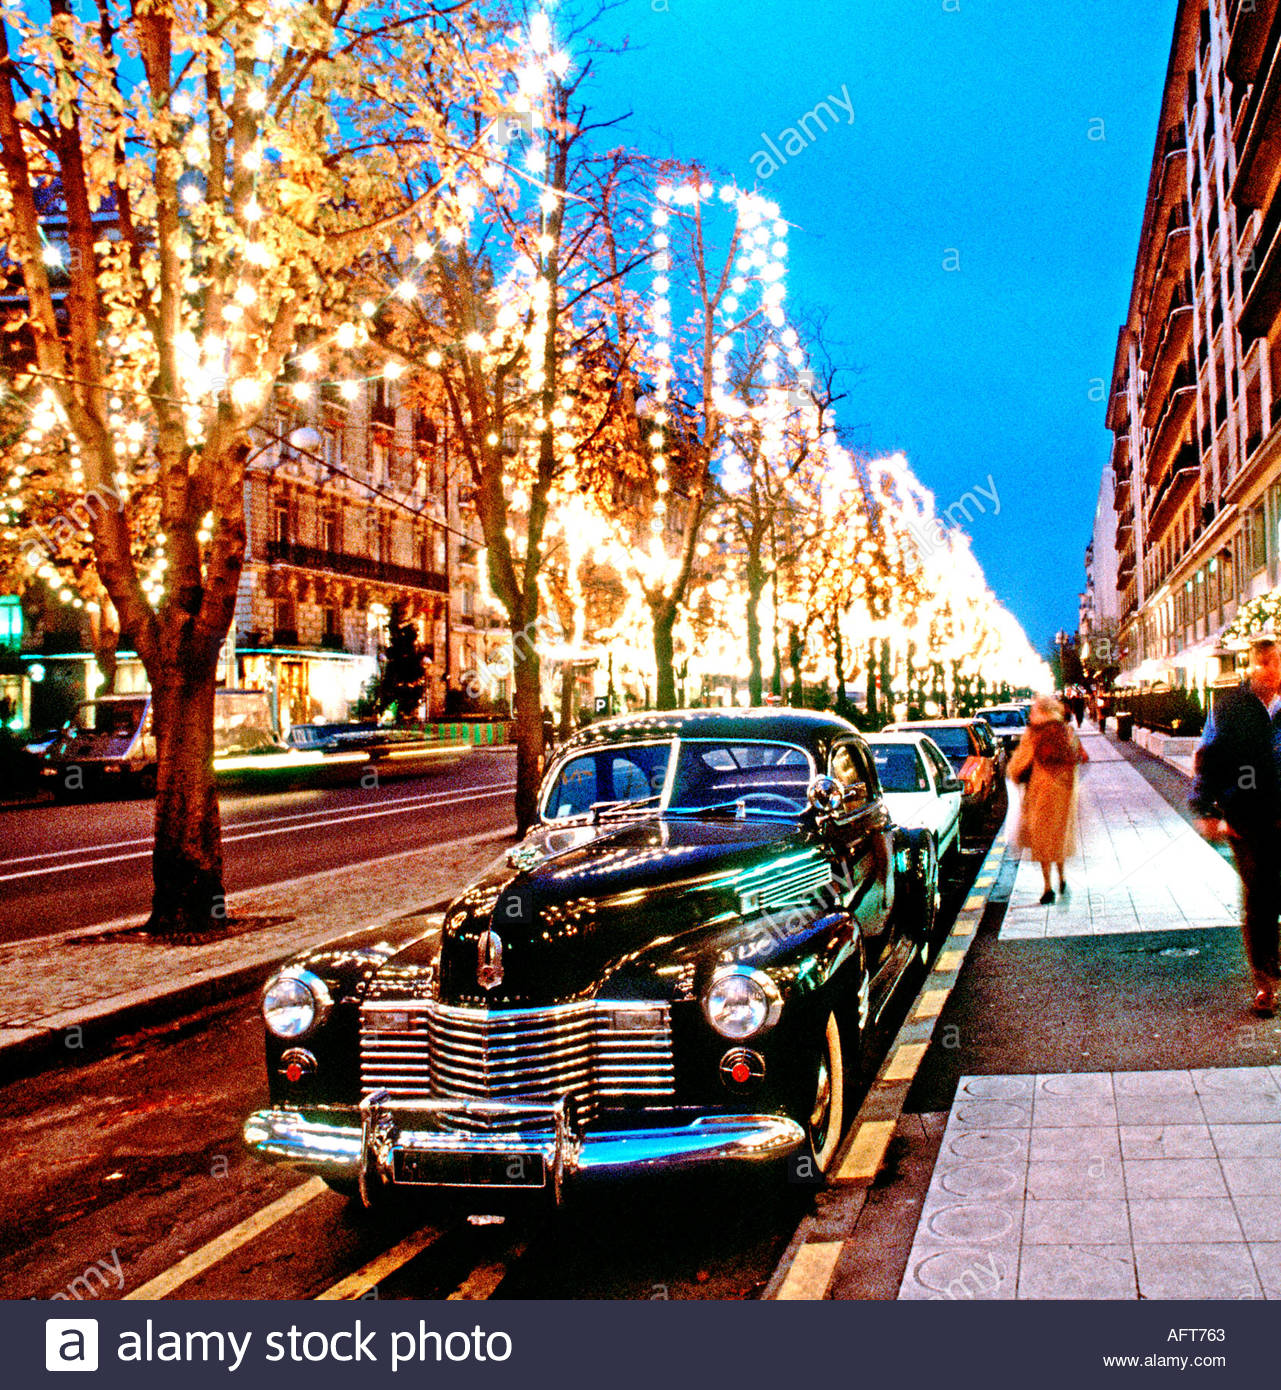 Christmas in Paris France "Ave Montaigne" Winter Street Scene Lit Up at  Night, vintage paris street cars, france electricity wasting Stock Photo -  Alamy